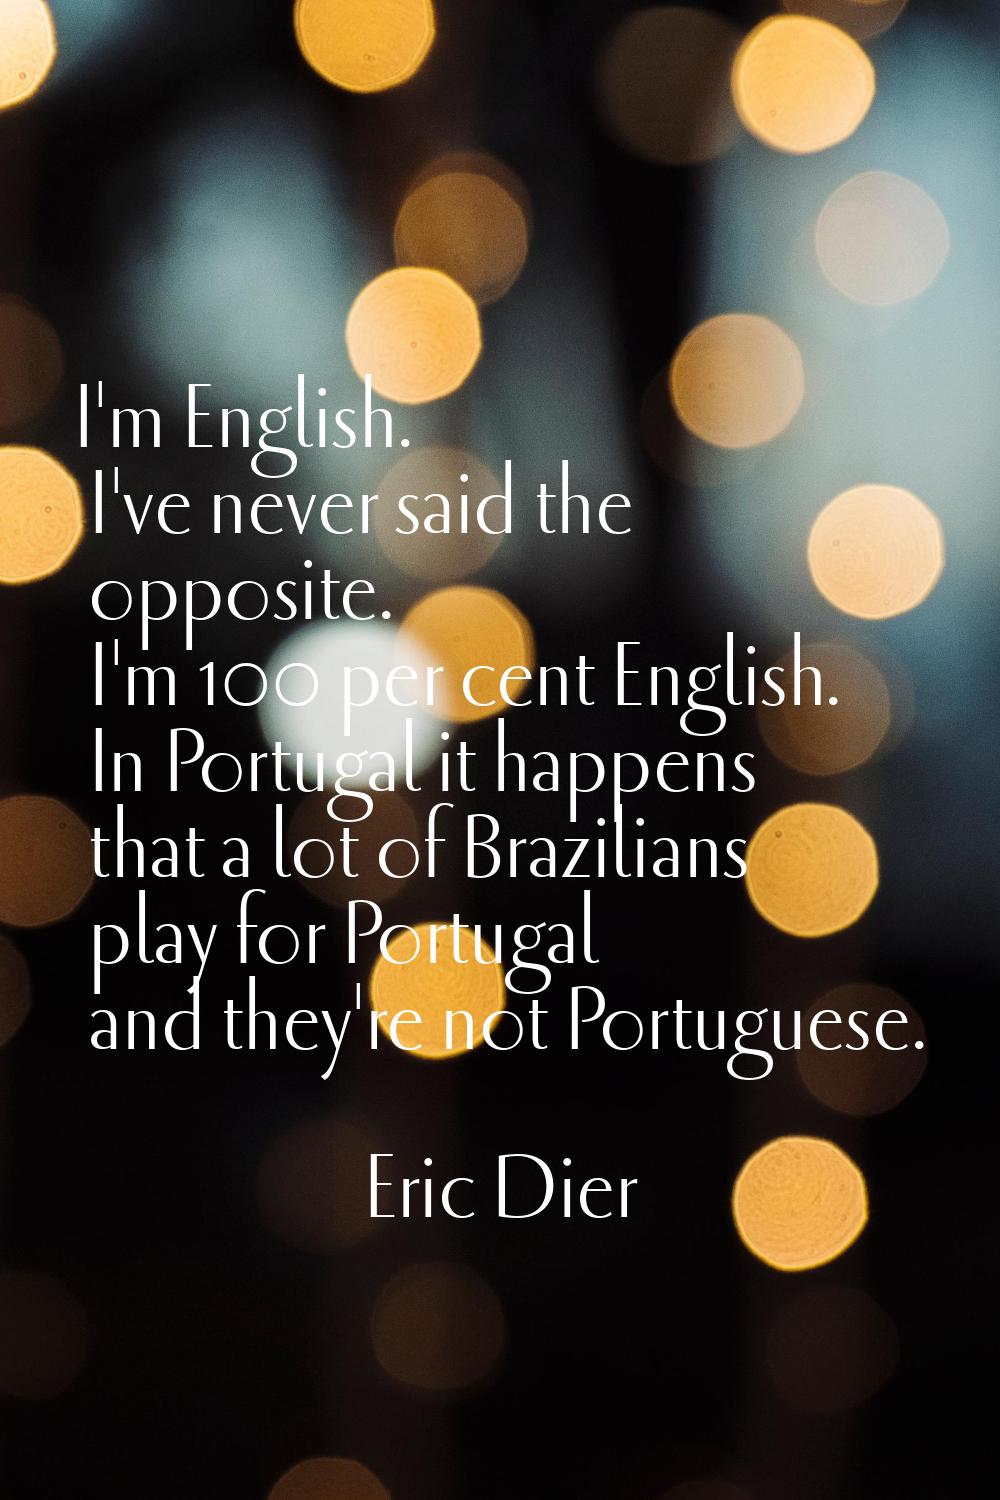 I'm English. I've never said the opposite. I'm 100 per cent English. In Portugal it happens that a 